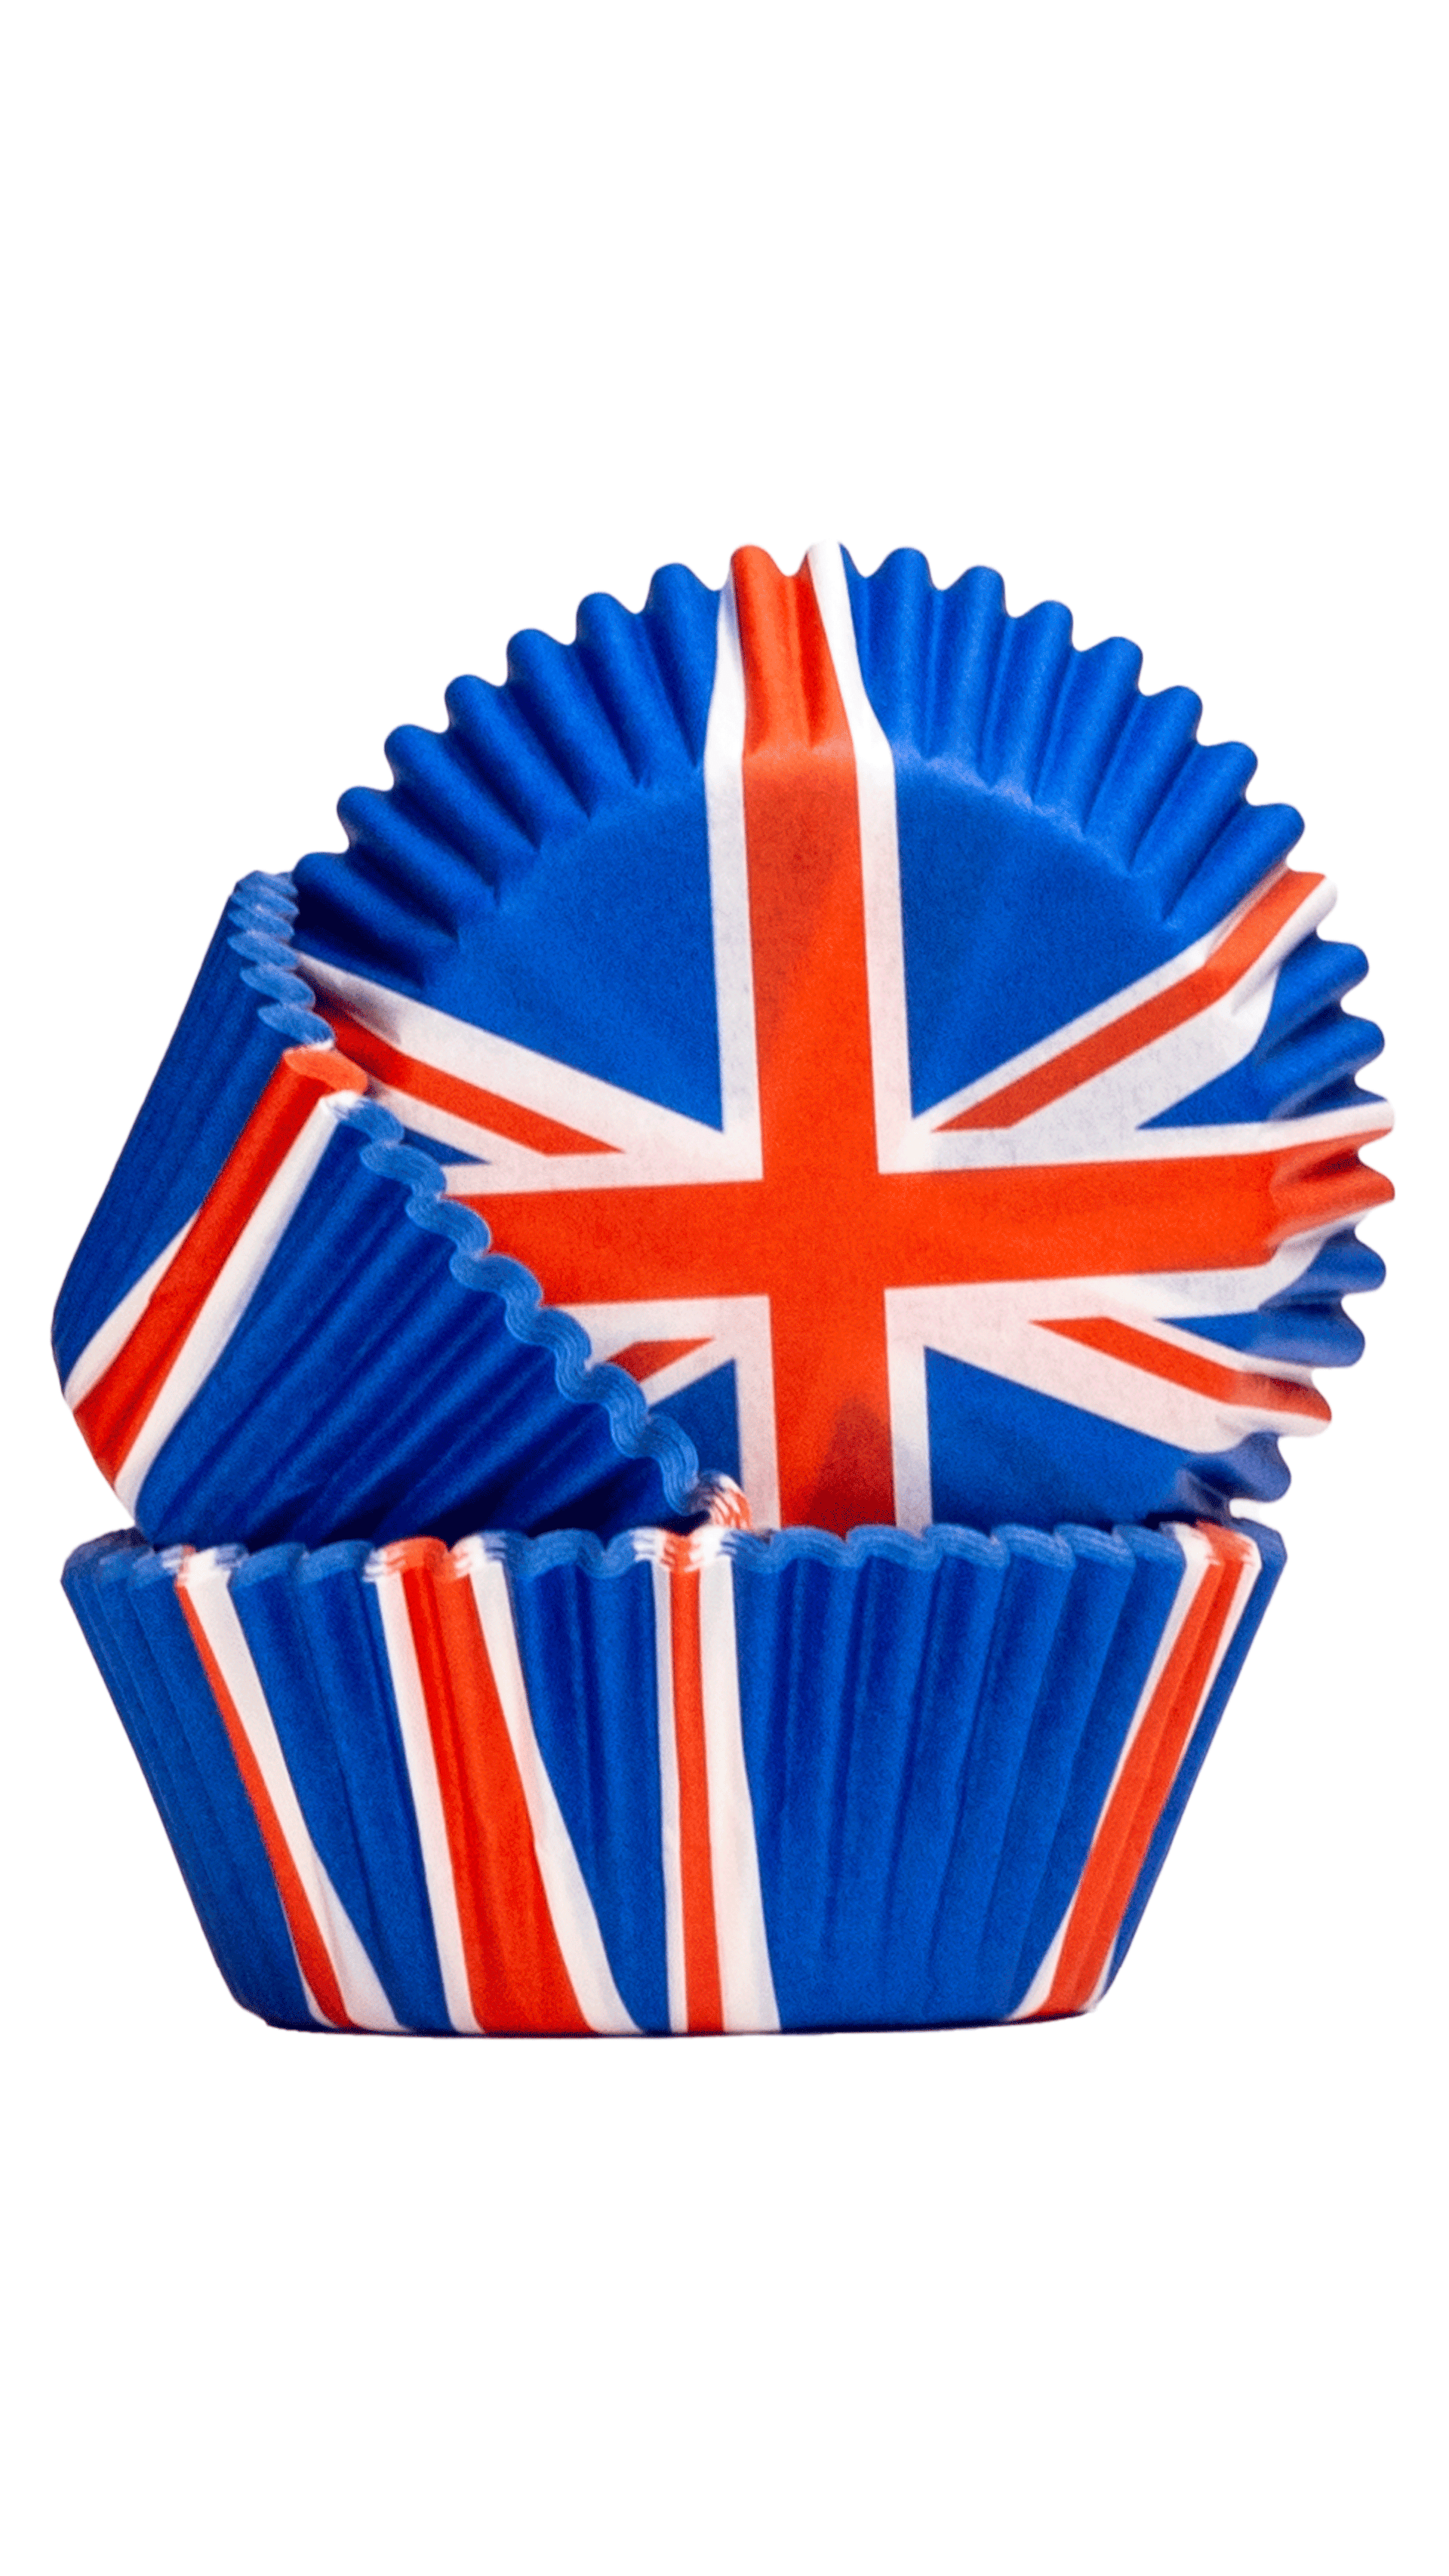 PME - Cupcake Cases - Union Jack - 60 Pack Cupcake Cases PME